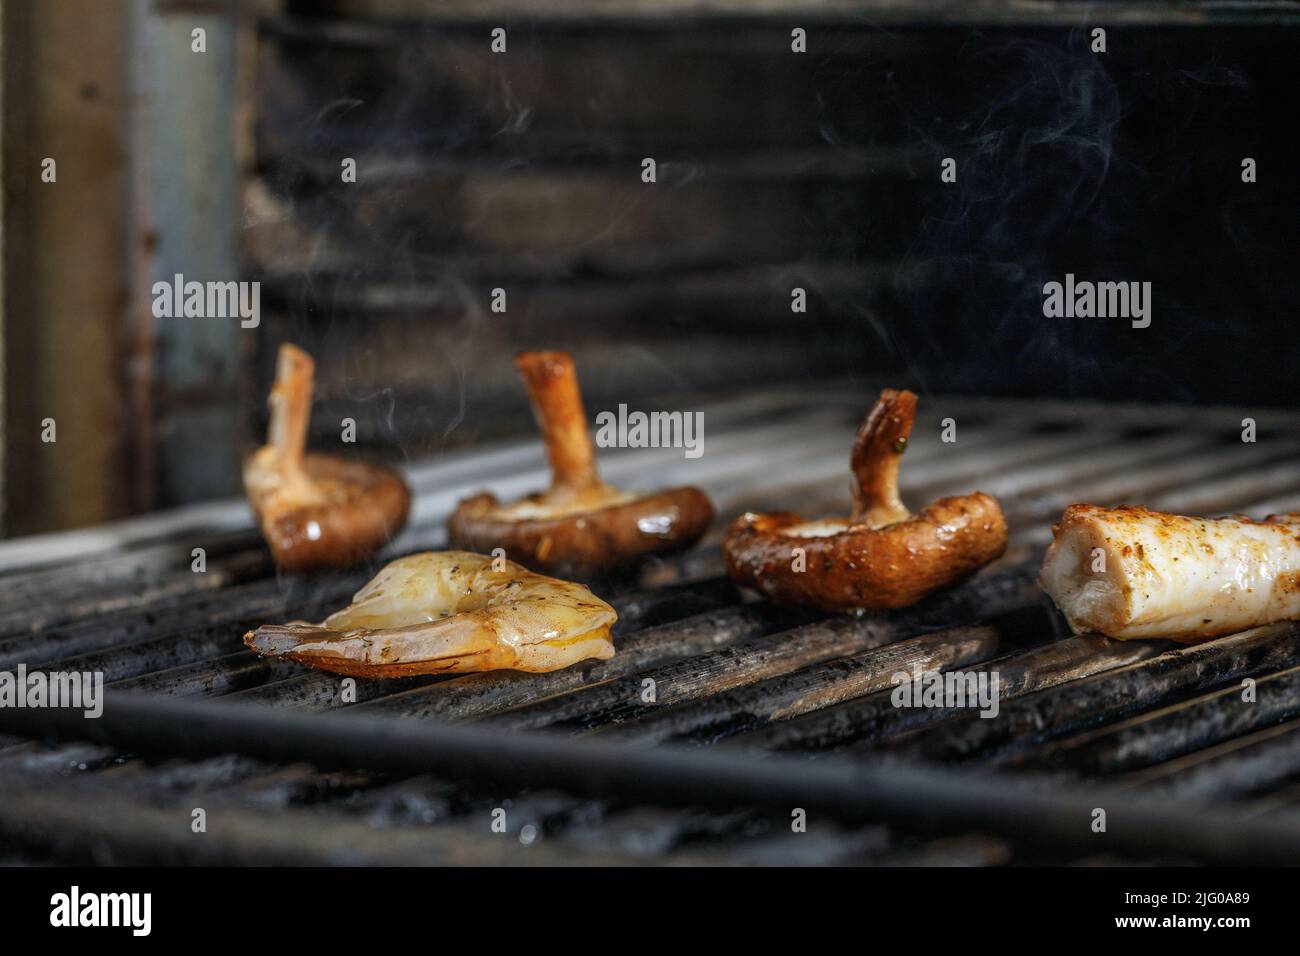 Process of grilling seafood on a barbecue grill over hot coal. Seafood recipes Stock Photo